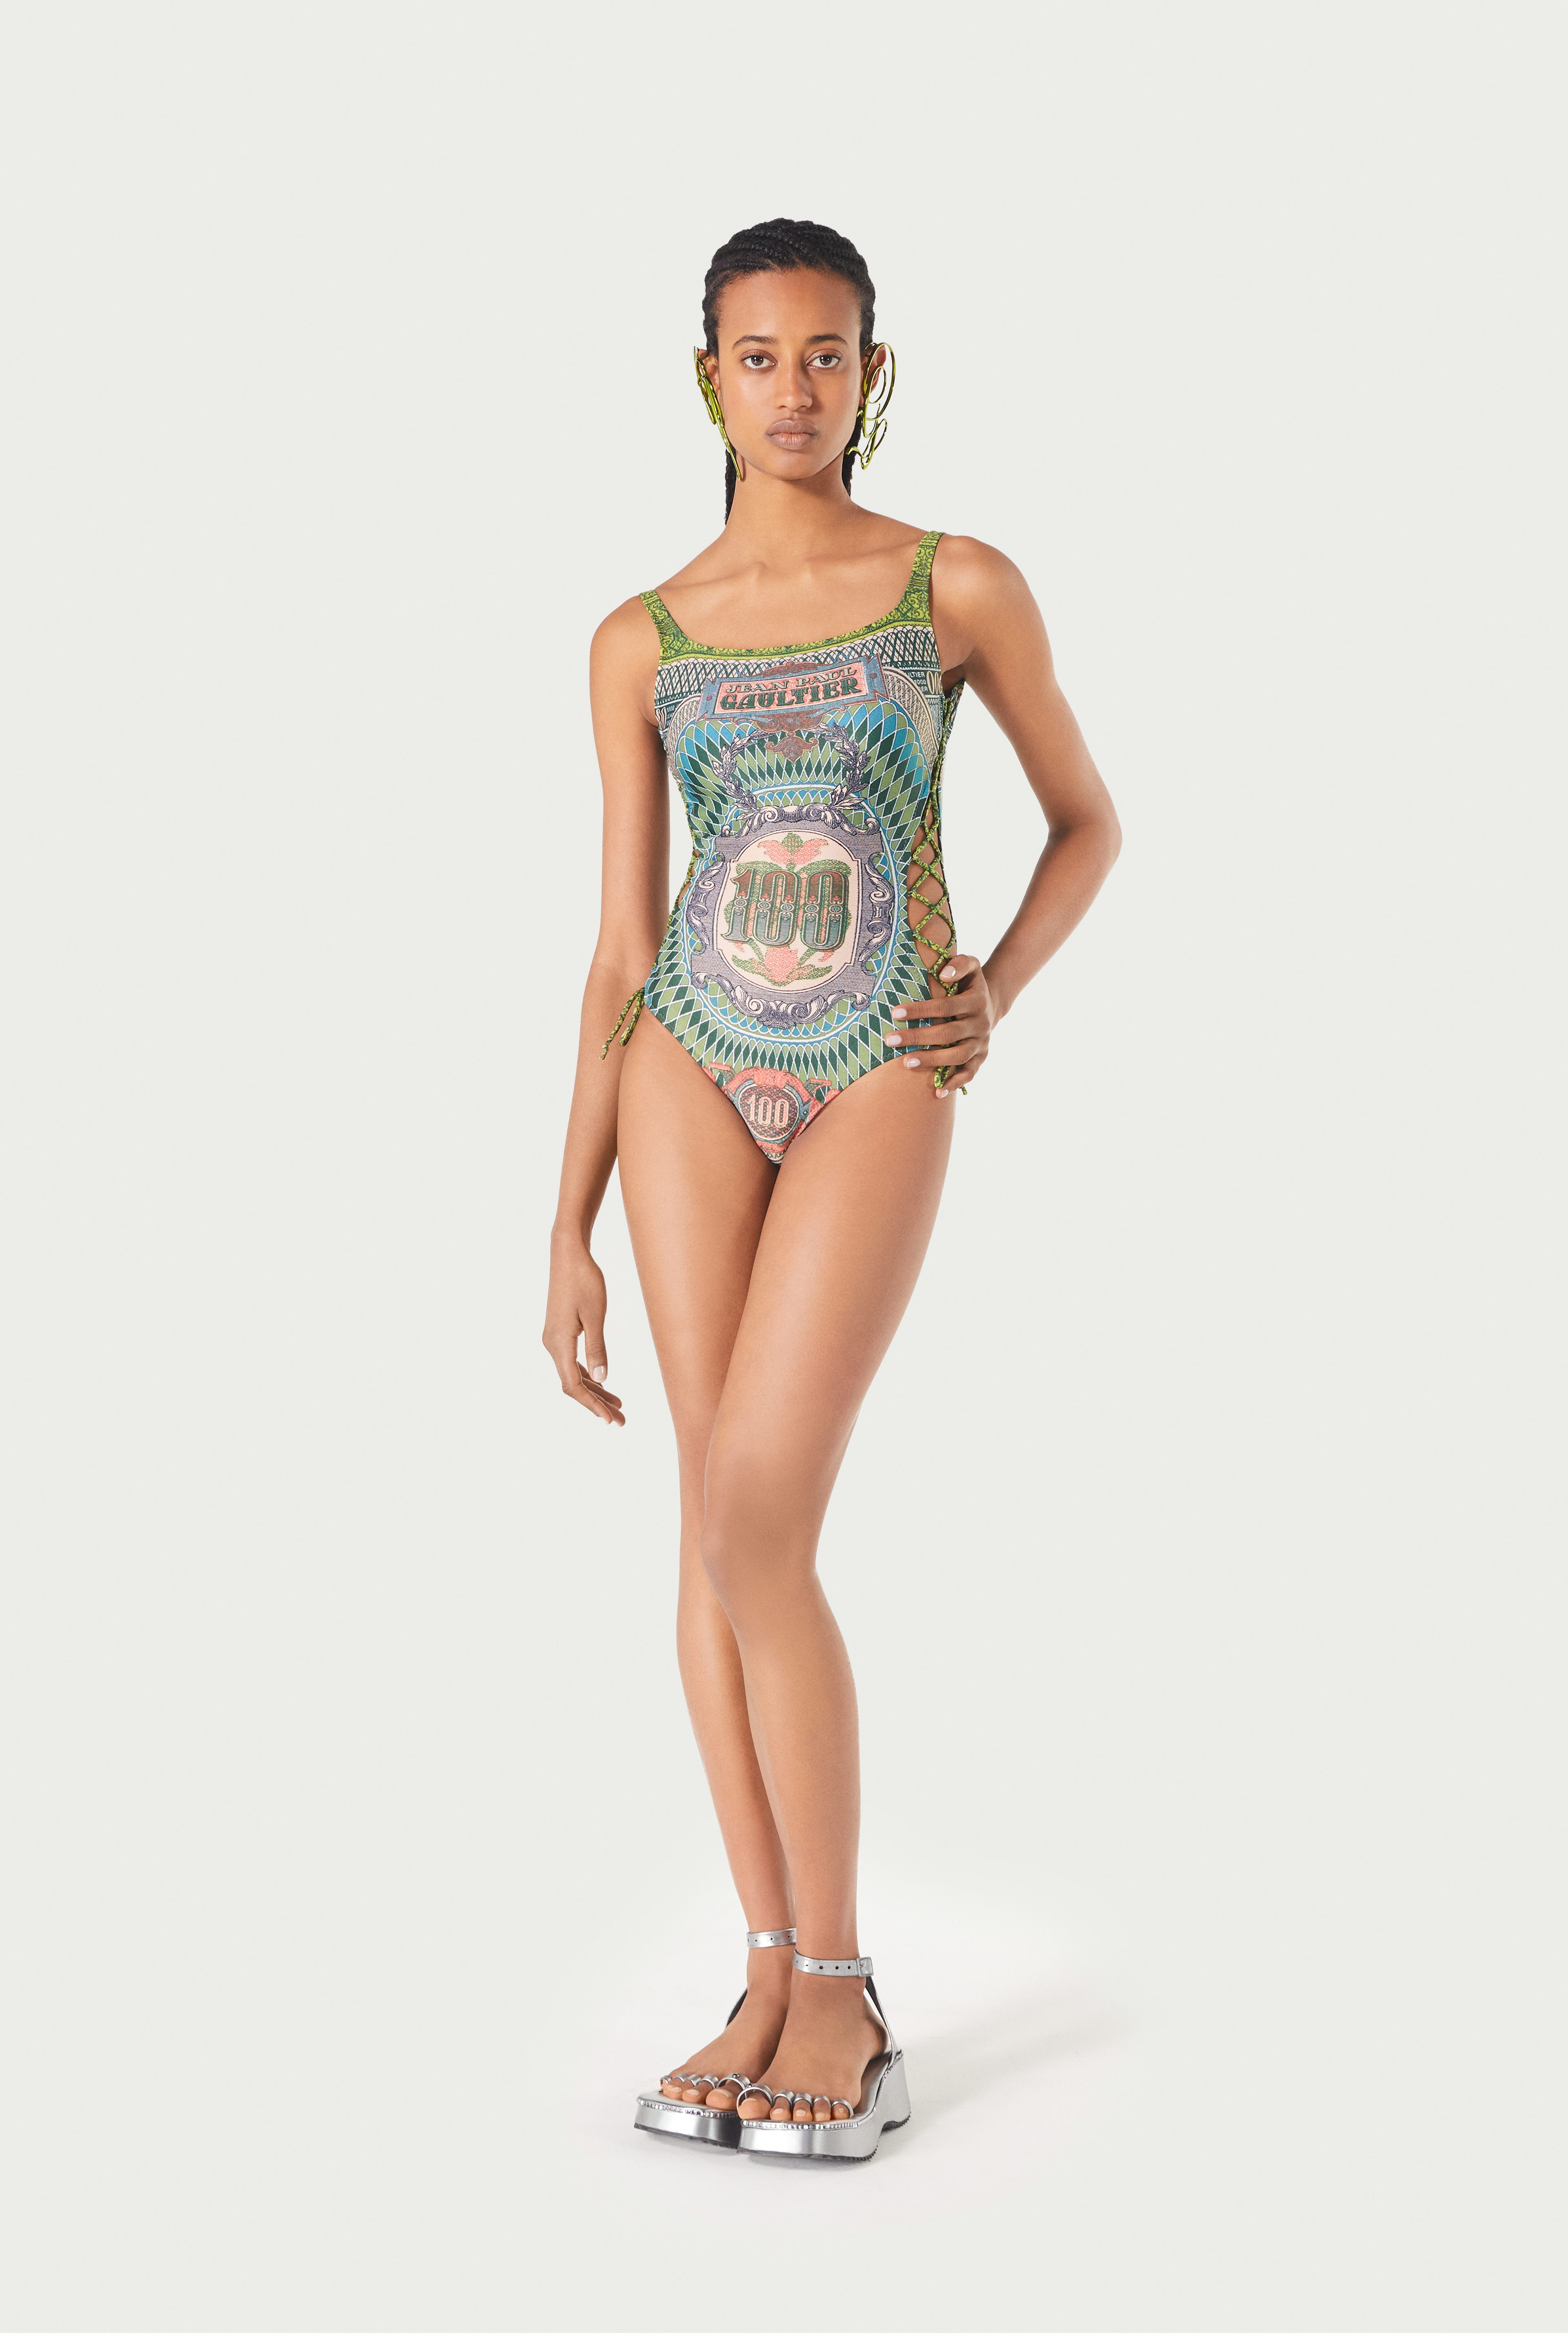 The Banknote Swimsuit